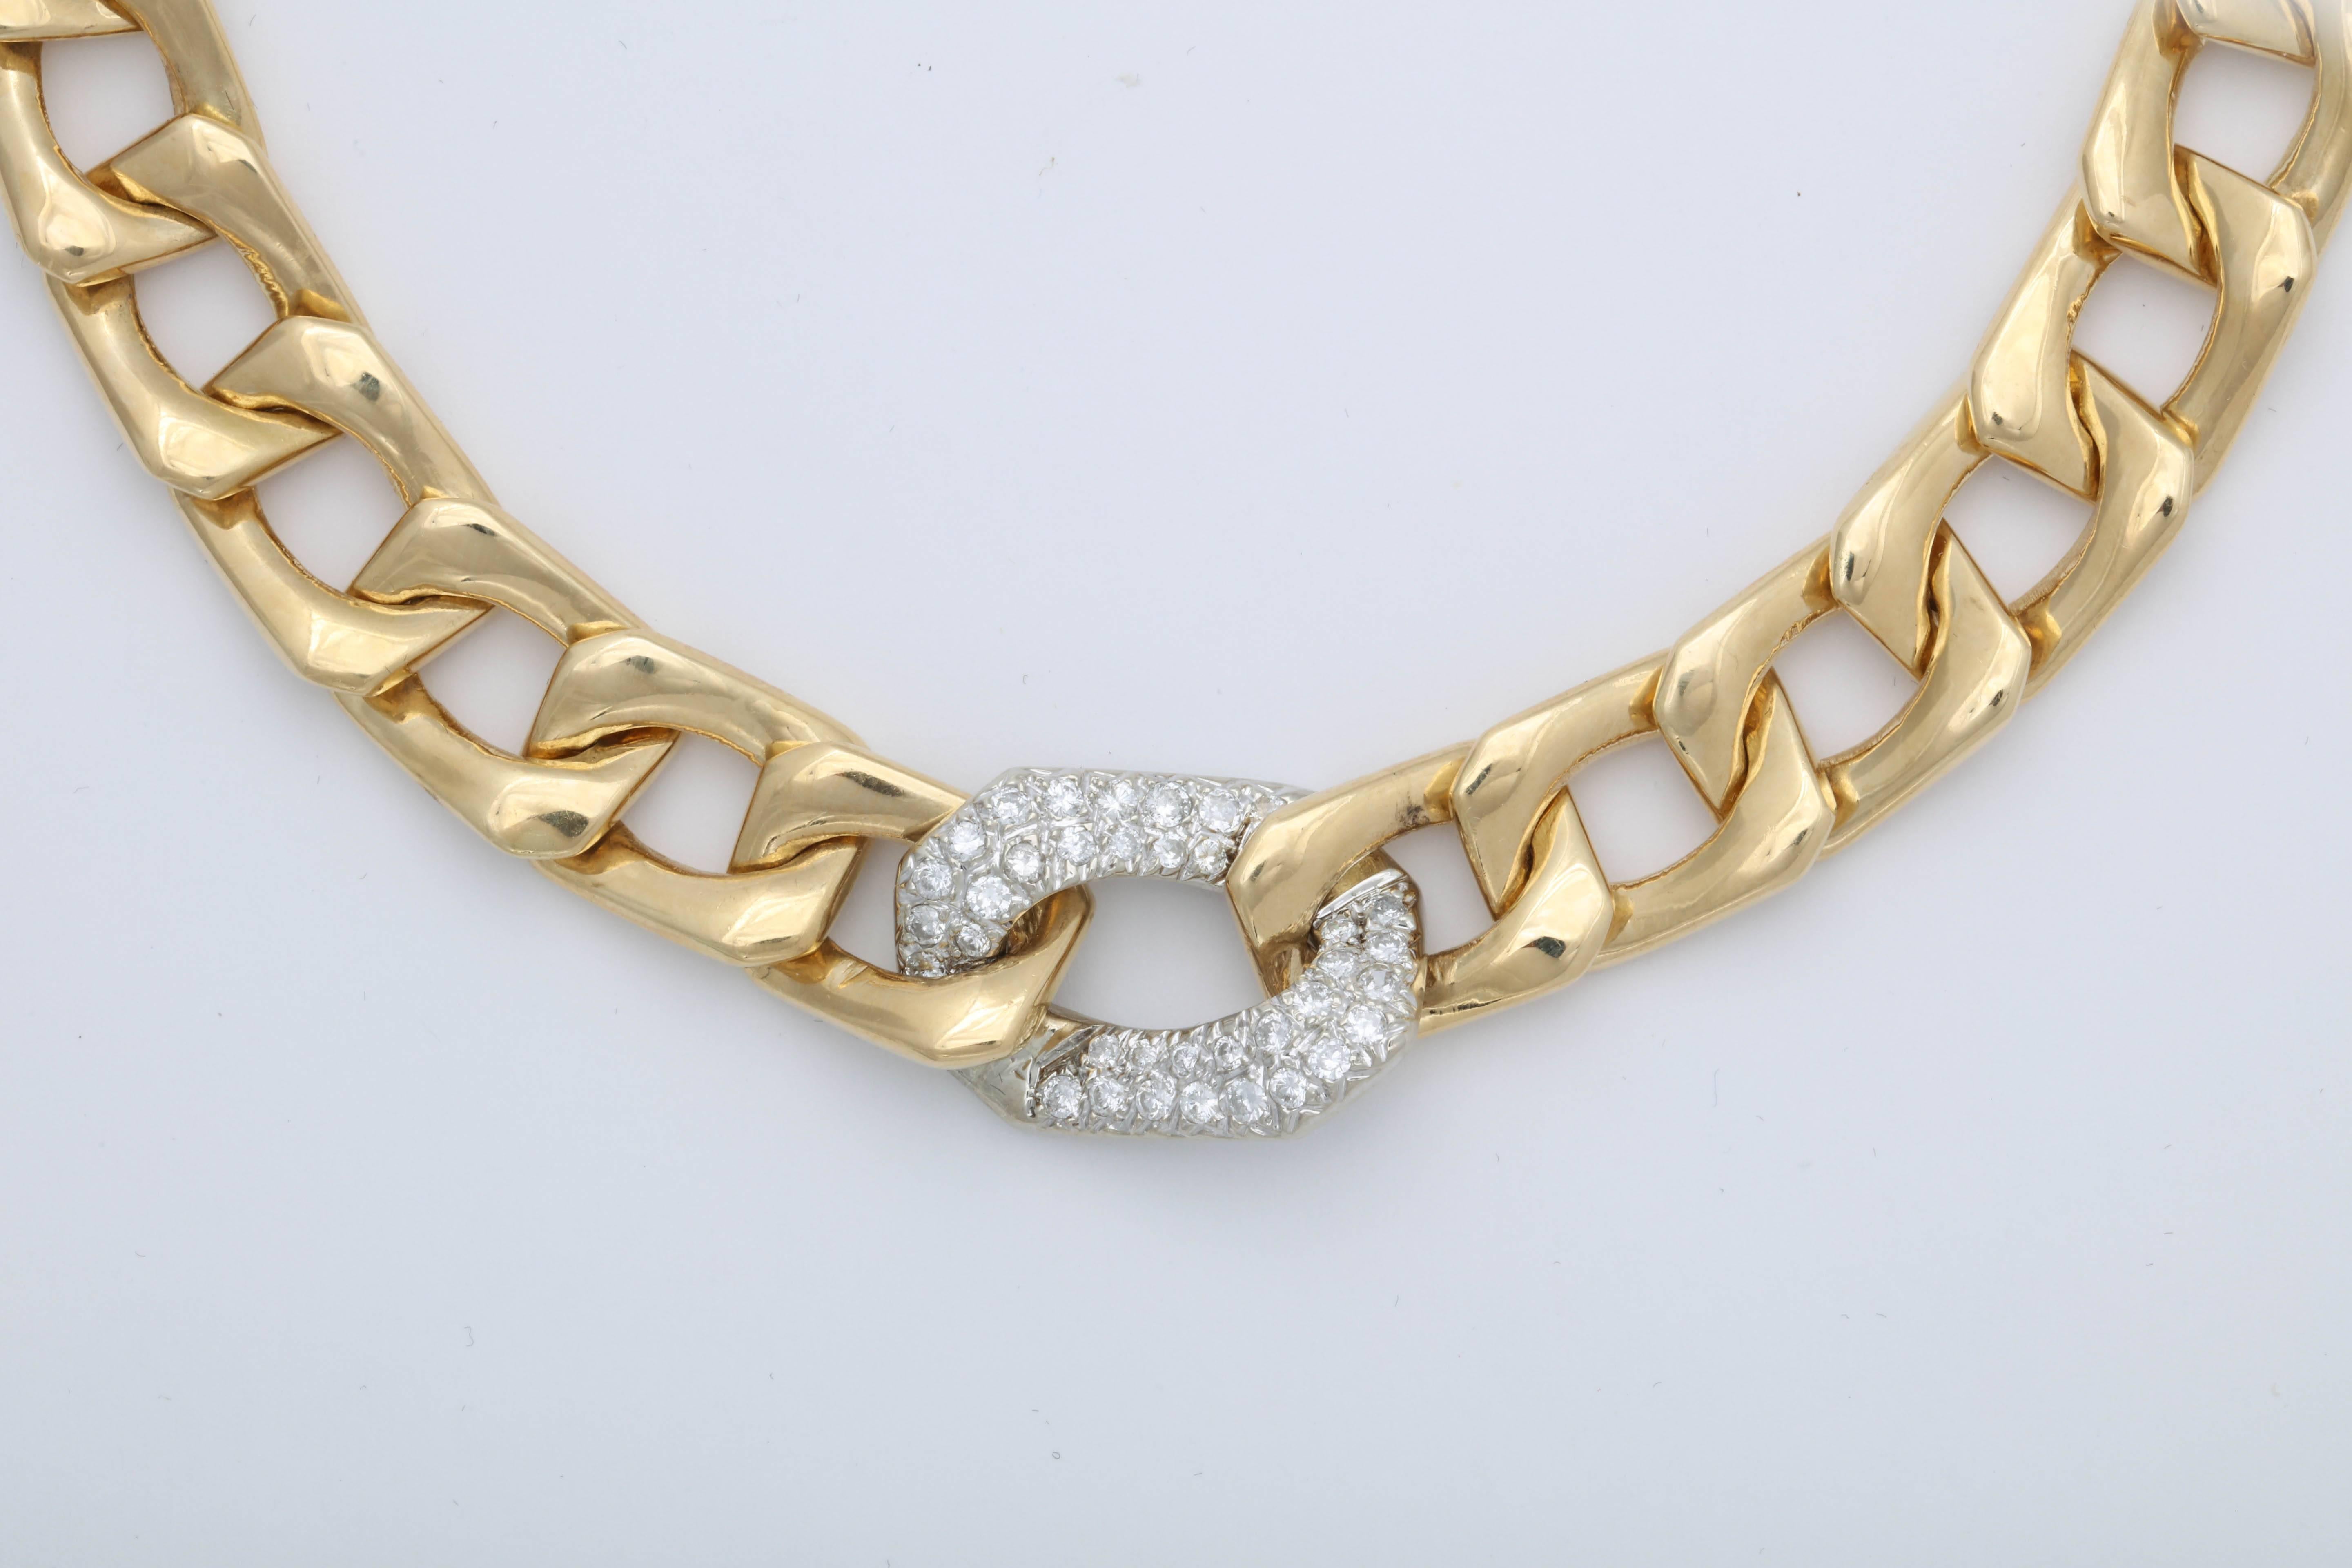 Large open spaced Flat curb chain link with Center Pave Diamond oval Link.  Diamonds clean, white & full cut totalling almost 2 carats.   Can be very dressy or can be worn as a signature piece all the time!